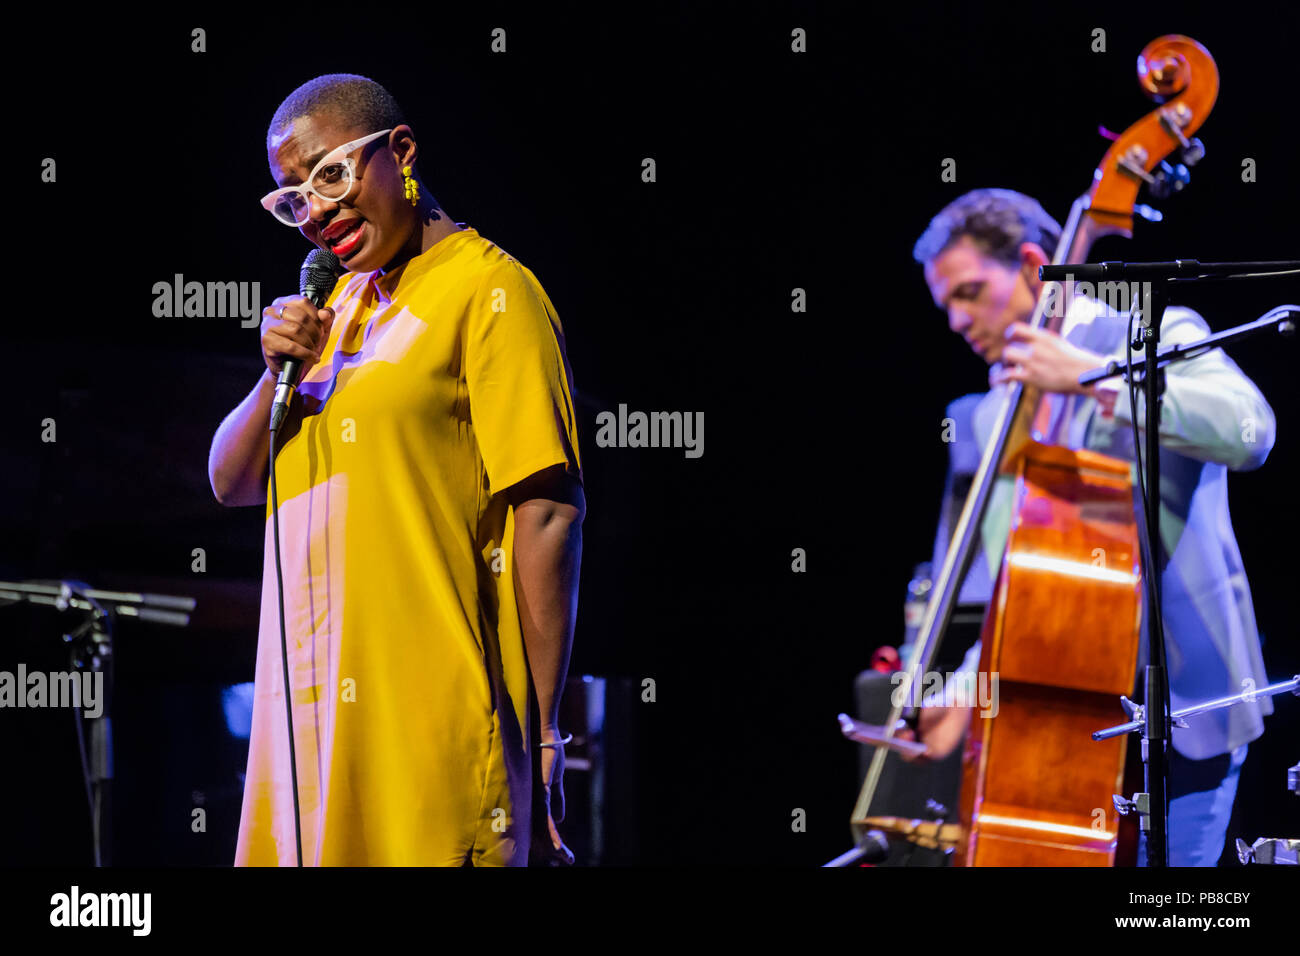 Barcelona, Spain. 25th July, 2018. Concert by Ceceli McLorin Salvant in BARTS. Festival GREC and 50 Festival de Jazz. Photographer: © Aitor Rodero. Stock Photo